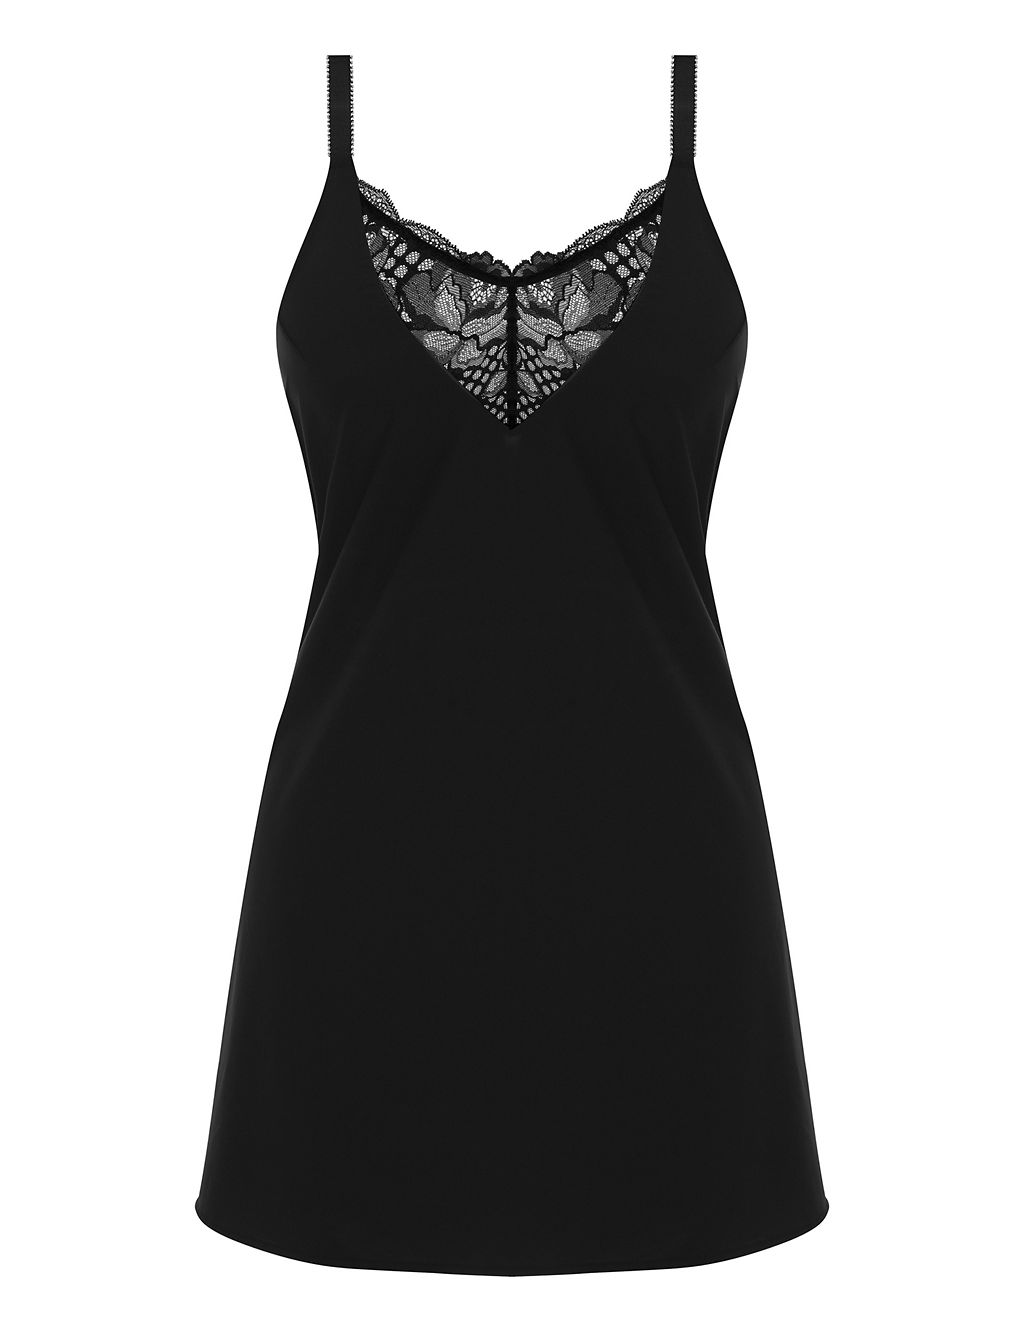 Reflect Lace Trim Chemise 1 of 4